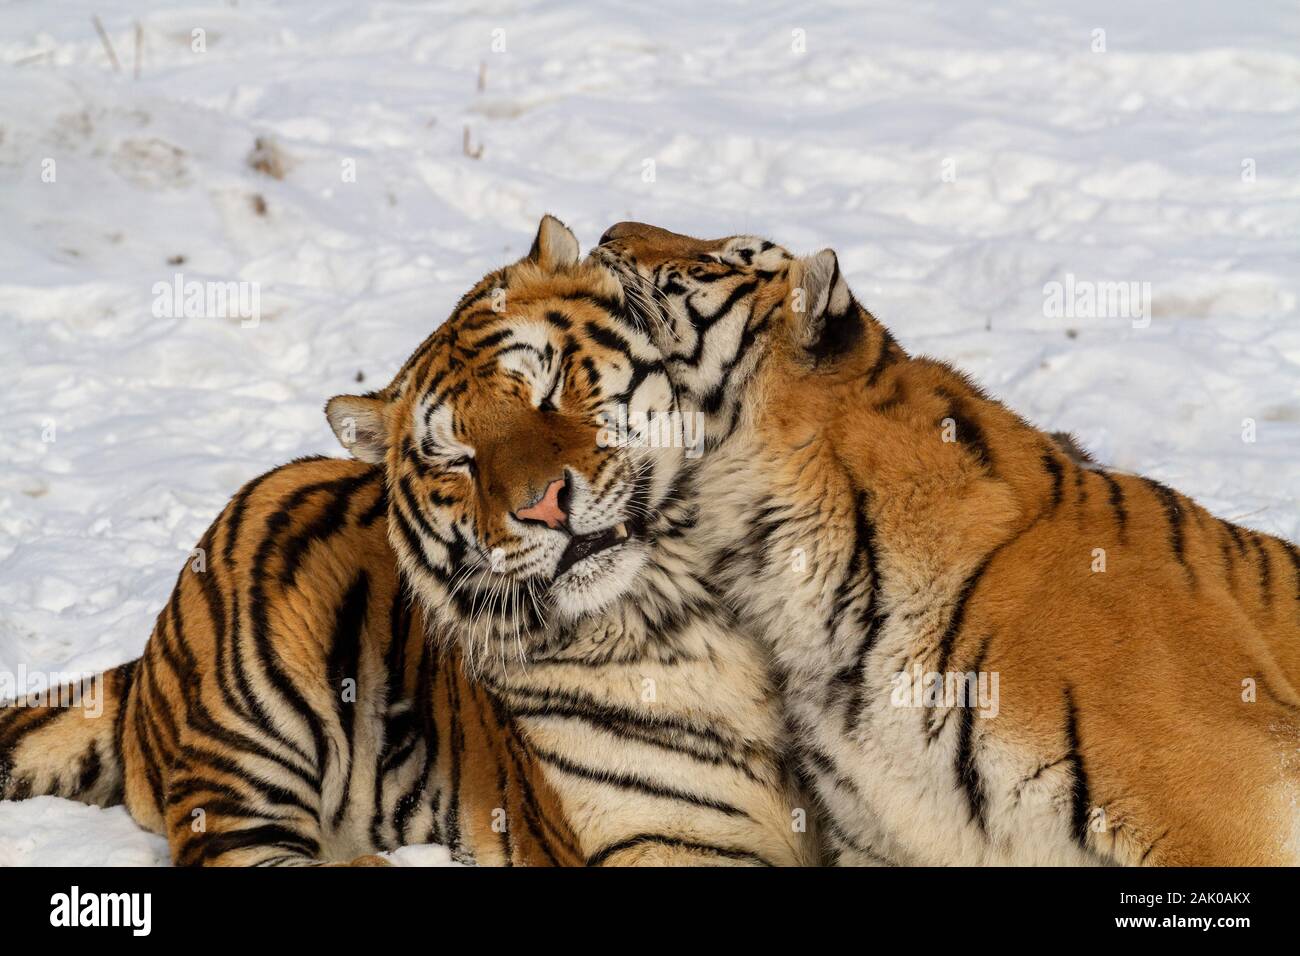 Siberian tigers in the tiger conservation park in Hailin, Heilongjiang province, North East China Stock Photo